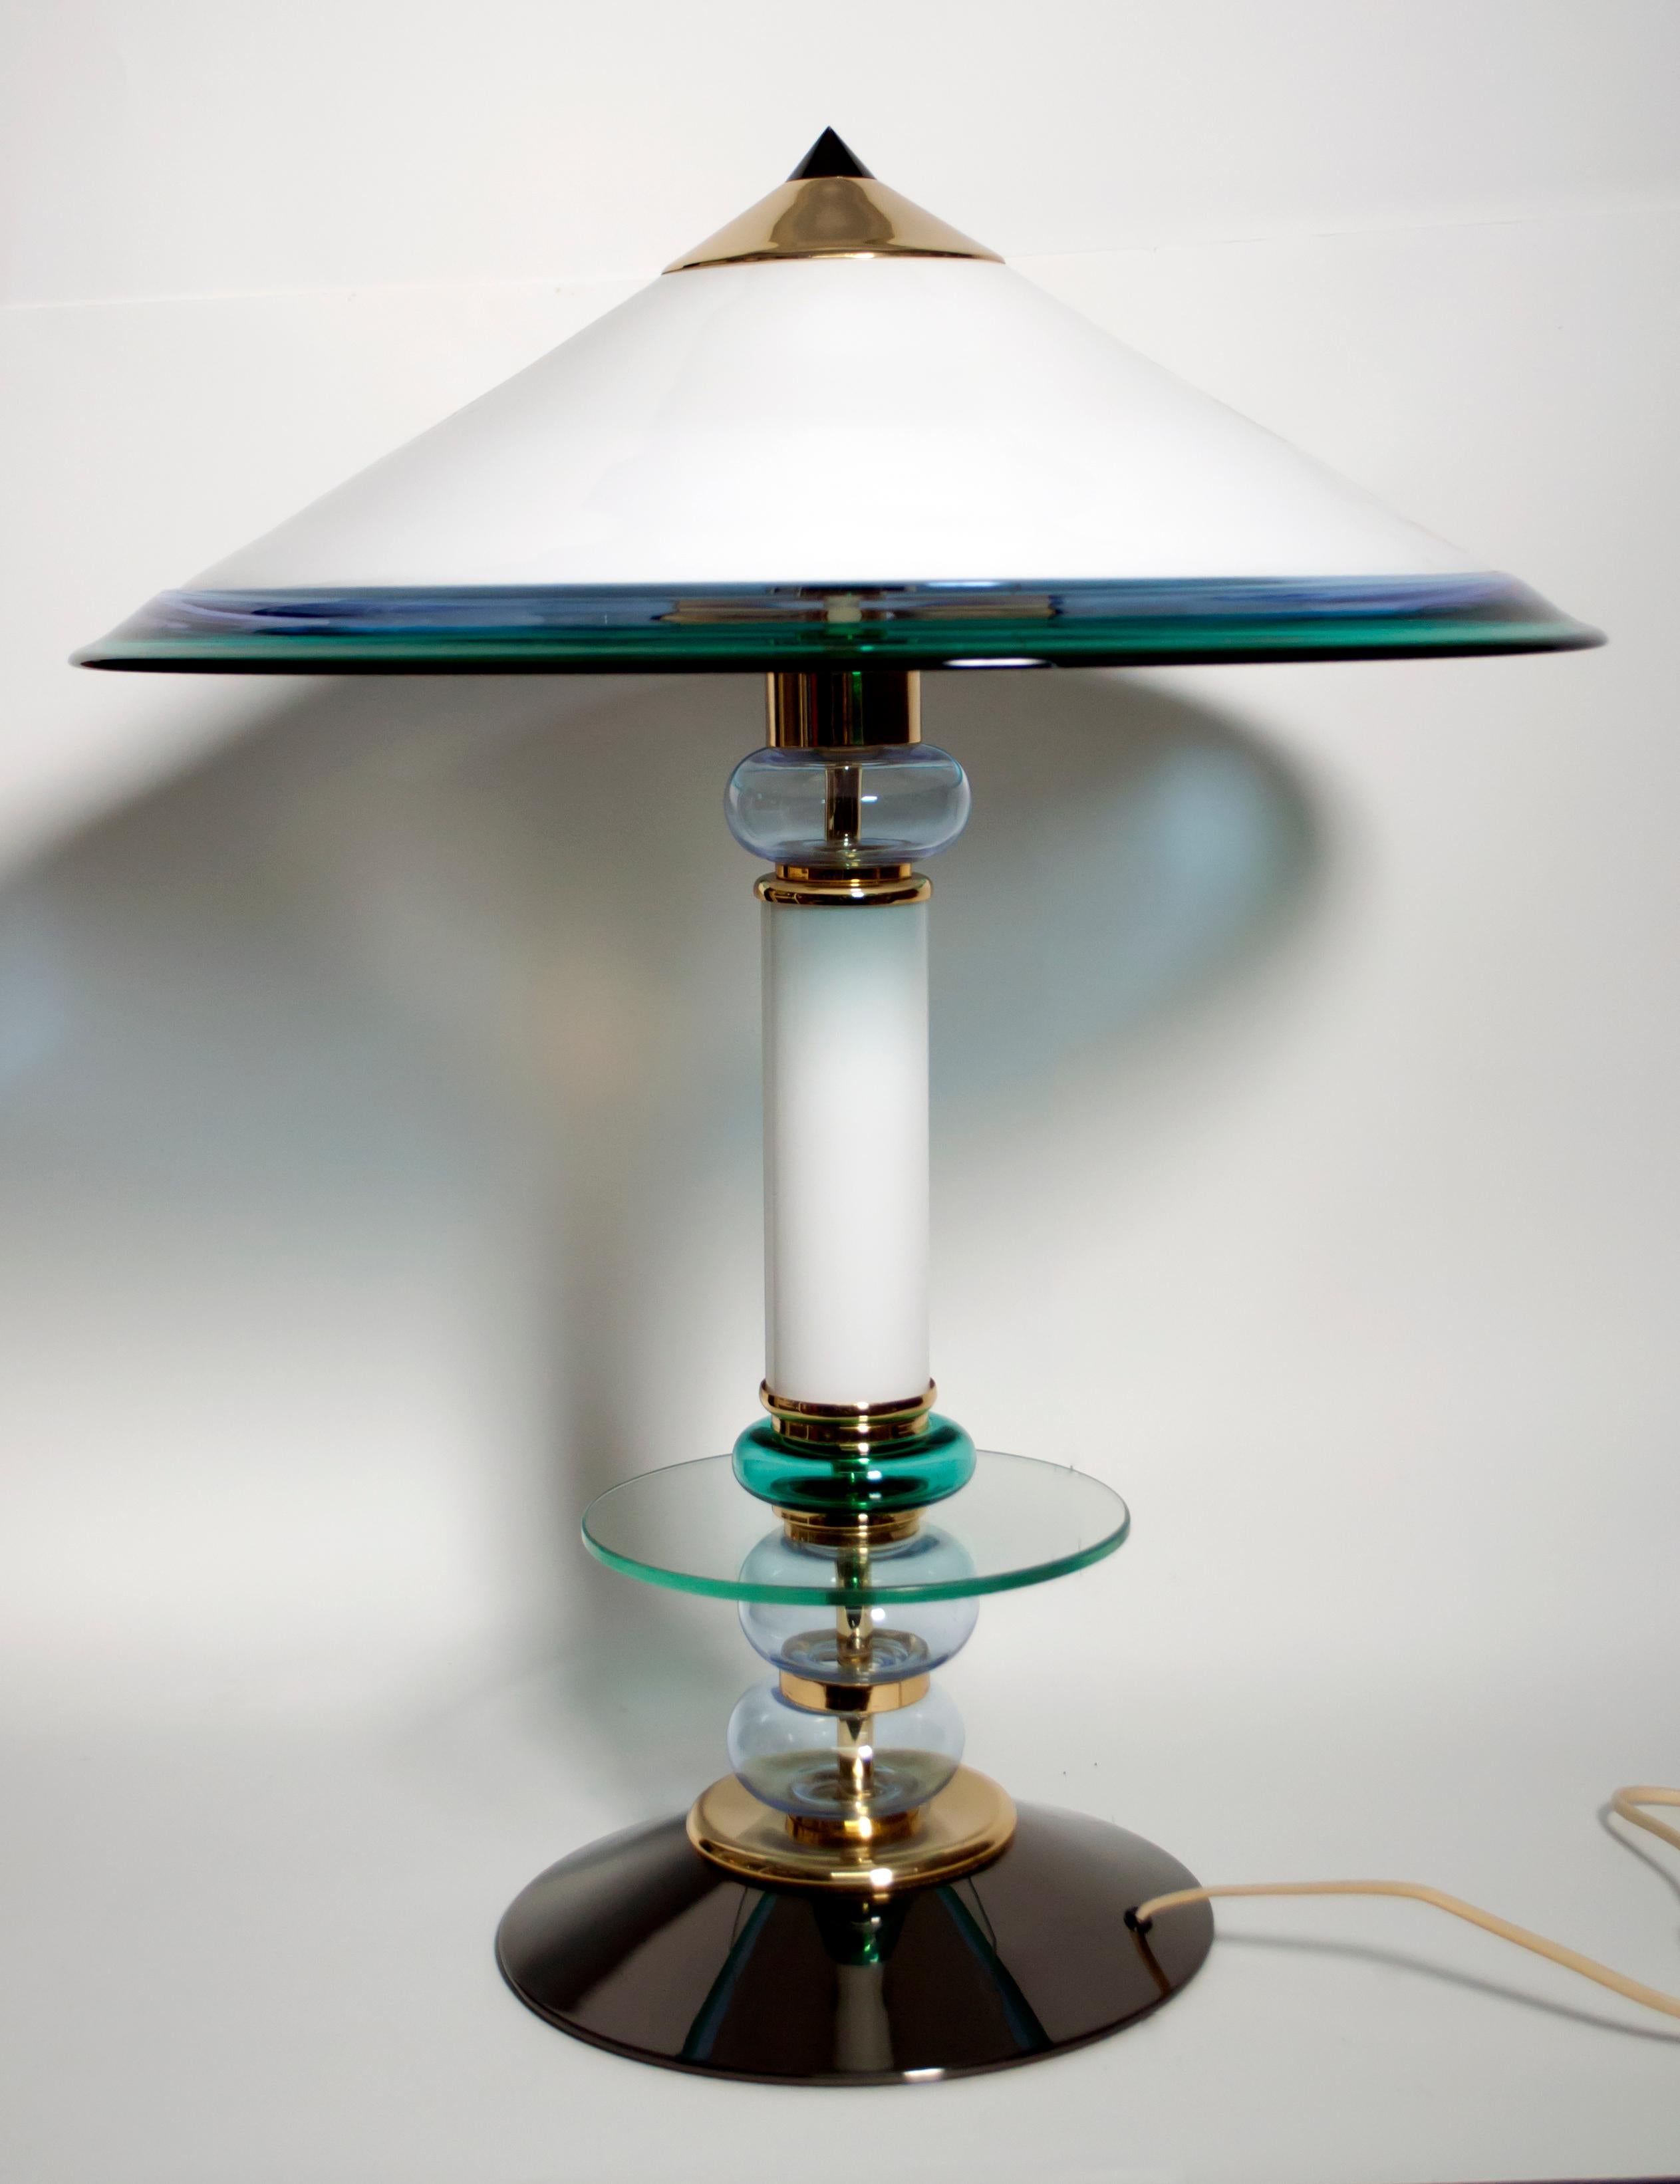 This Murano glass lamp, produced in the 1980s, has a gun metal base and brass parts. It was designed in the style of Ettore Sottsass.